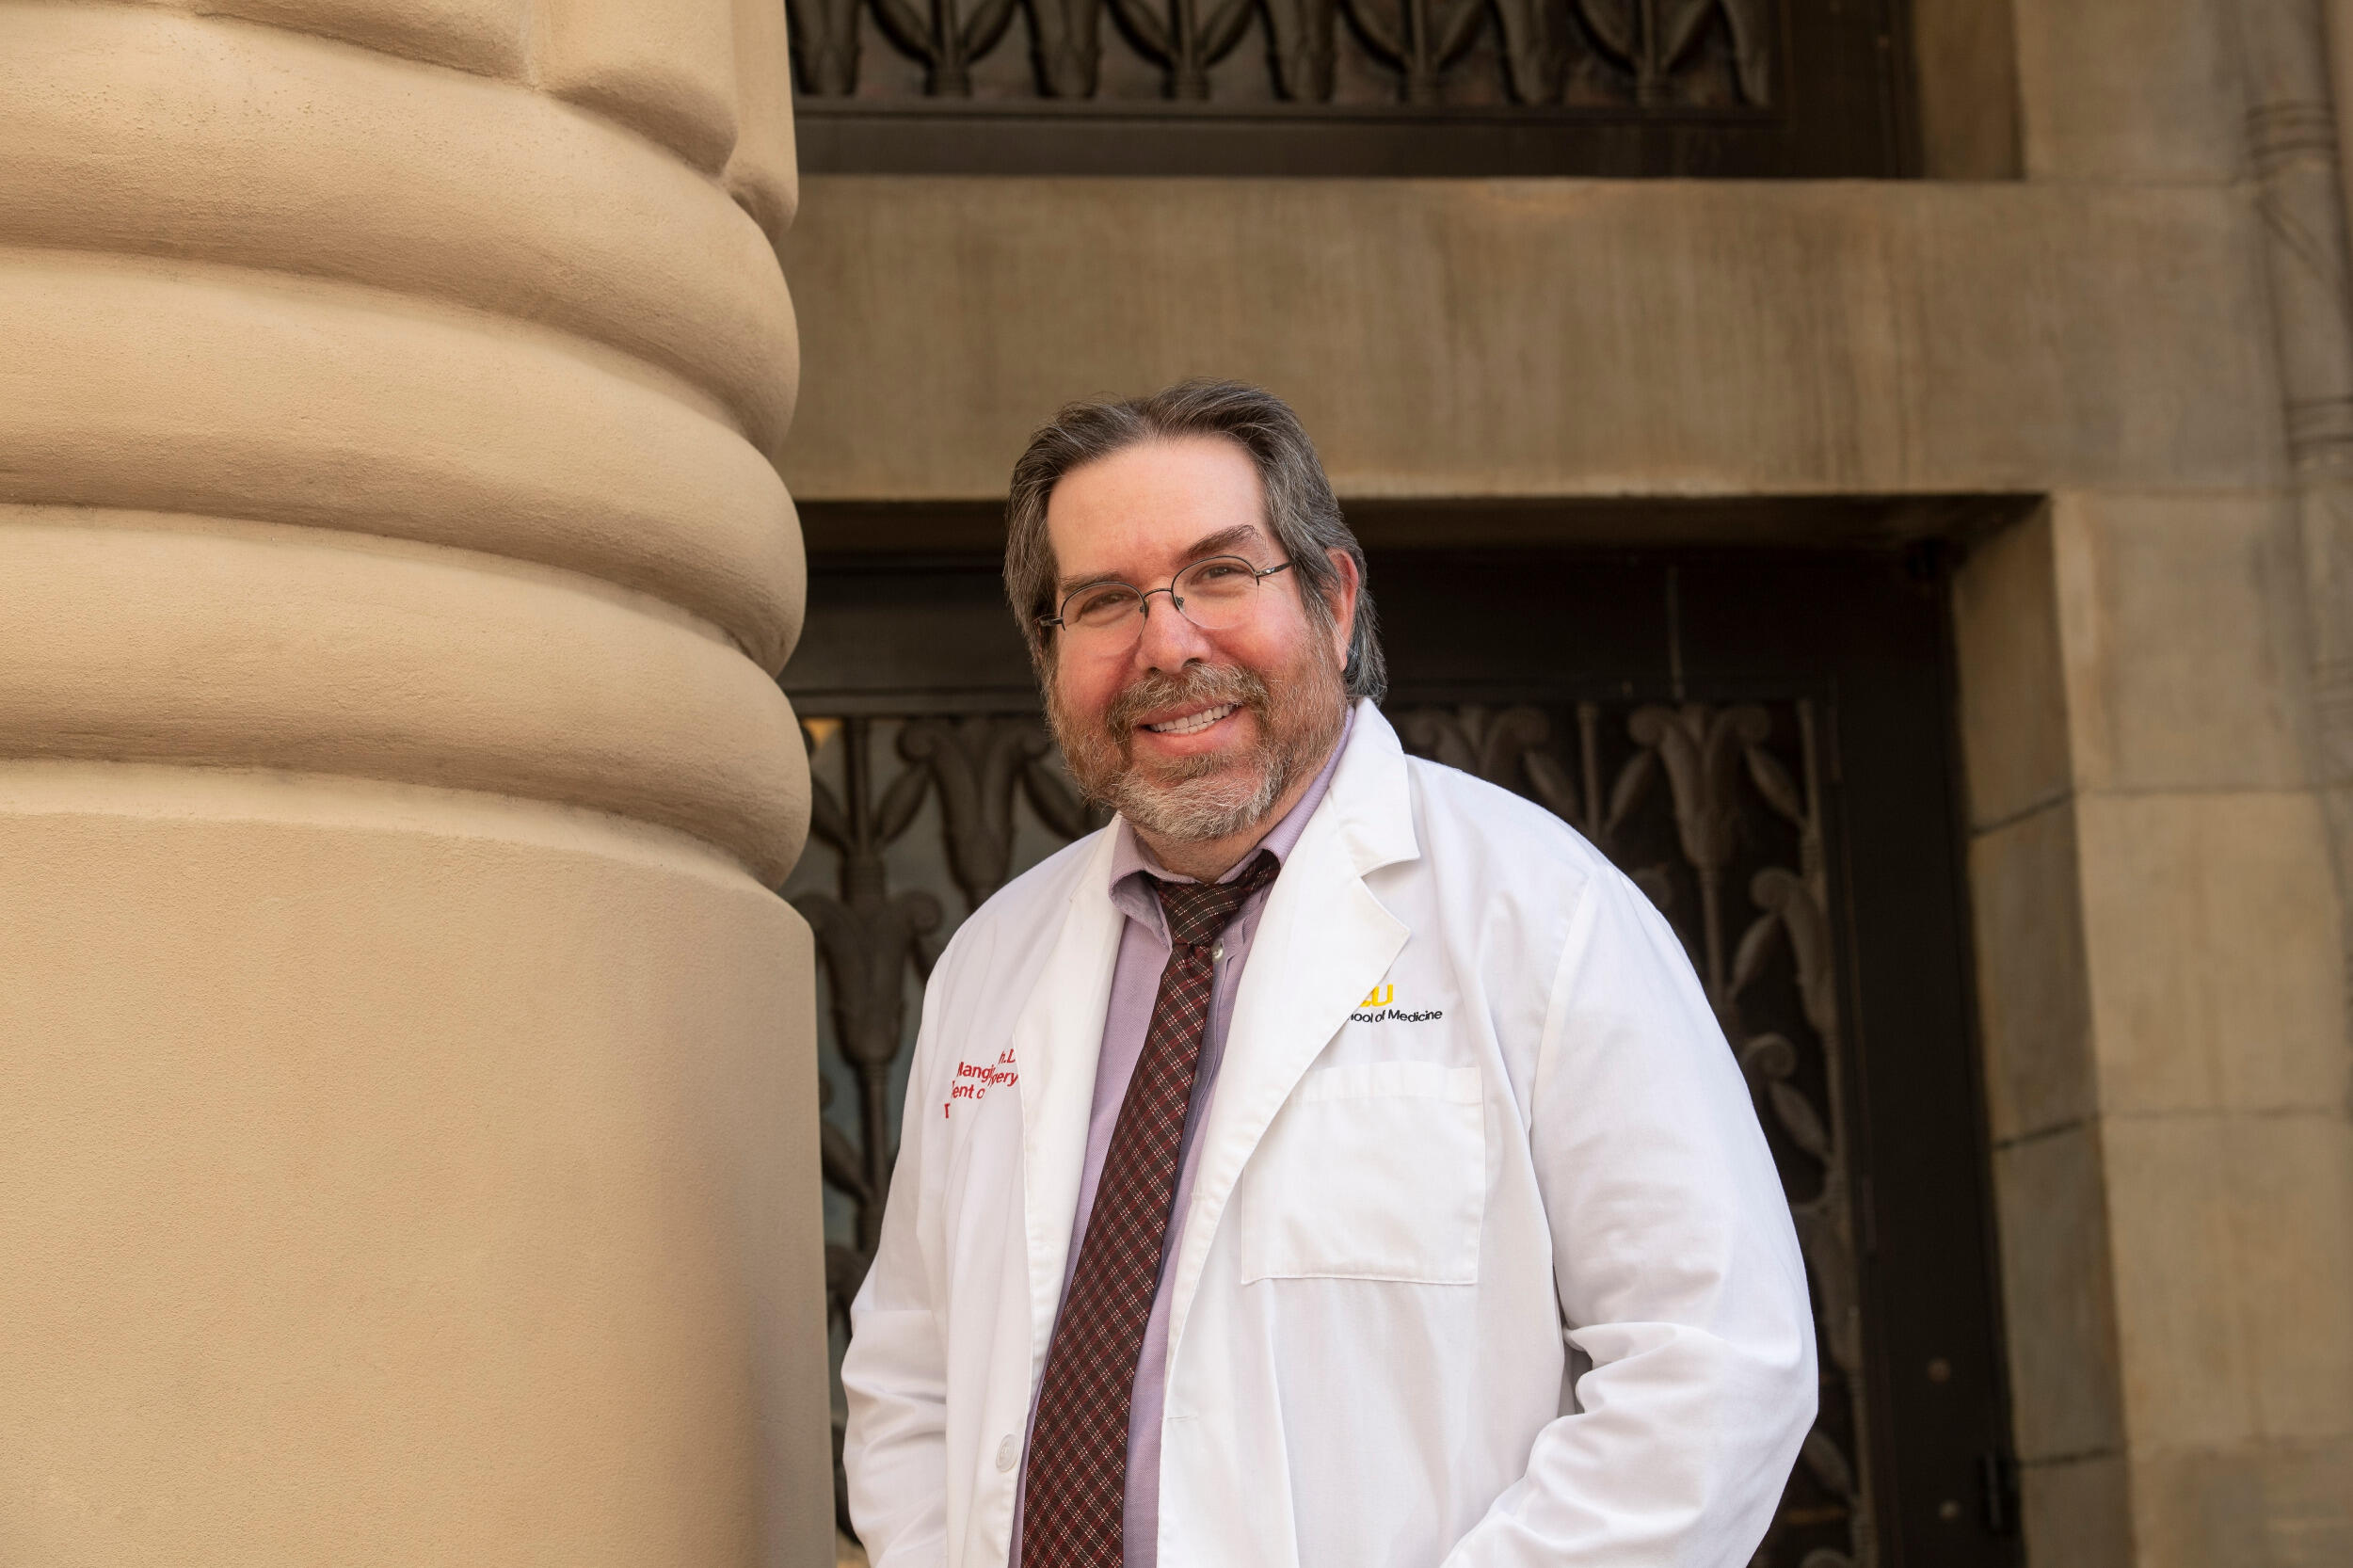 Image of Martin Mangino smiling in a lab coat and tie near a column.